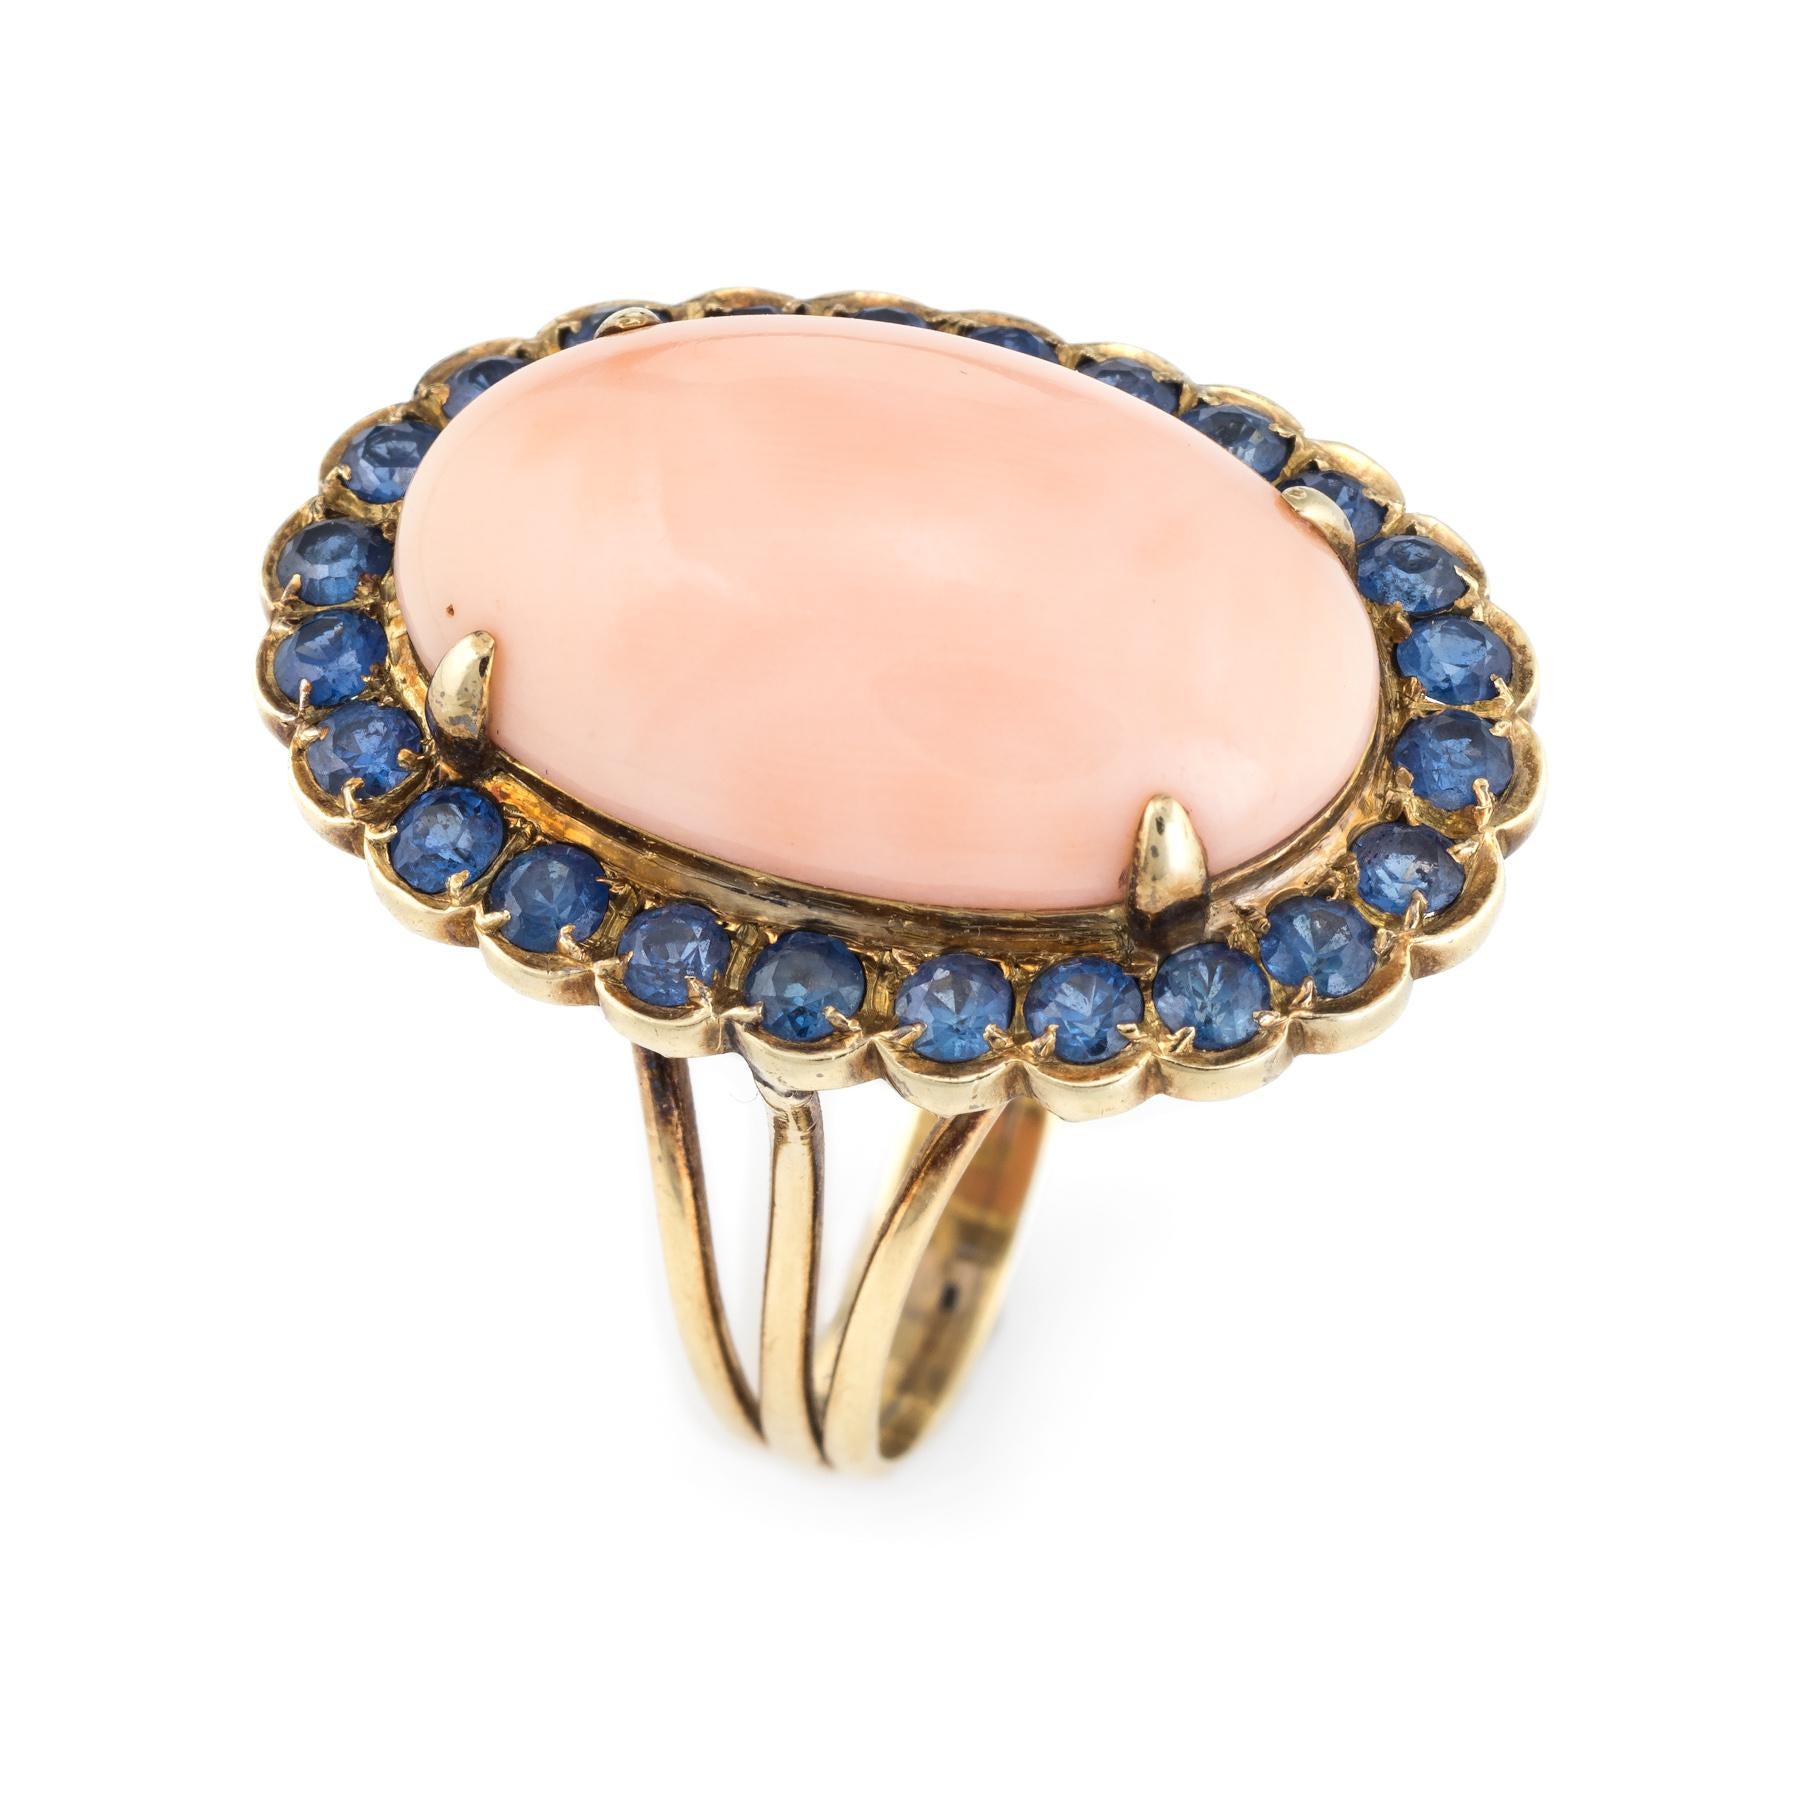 Cabochon Angel Skin Coral Sapphire Ring Vintage 14k Yellow Gold Oval Cocktail Jewelry